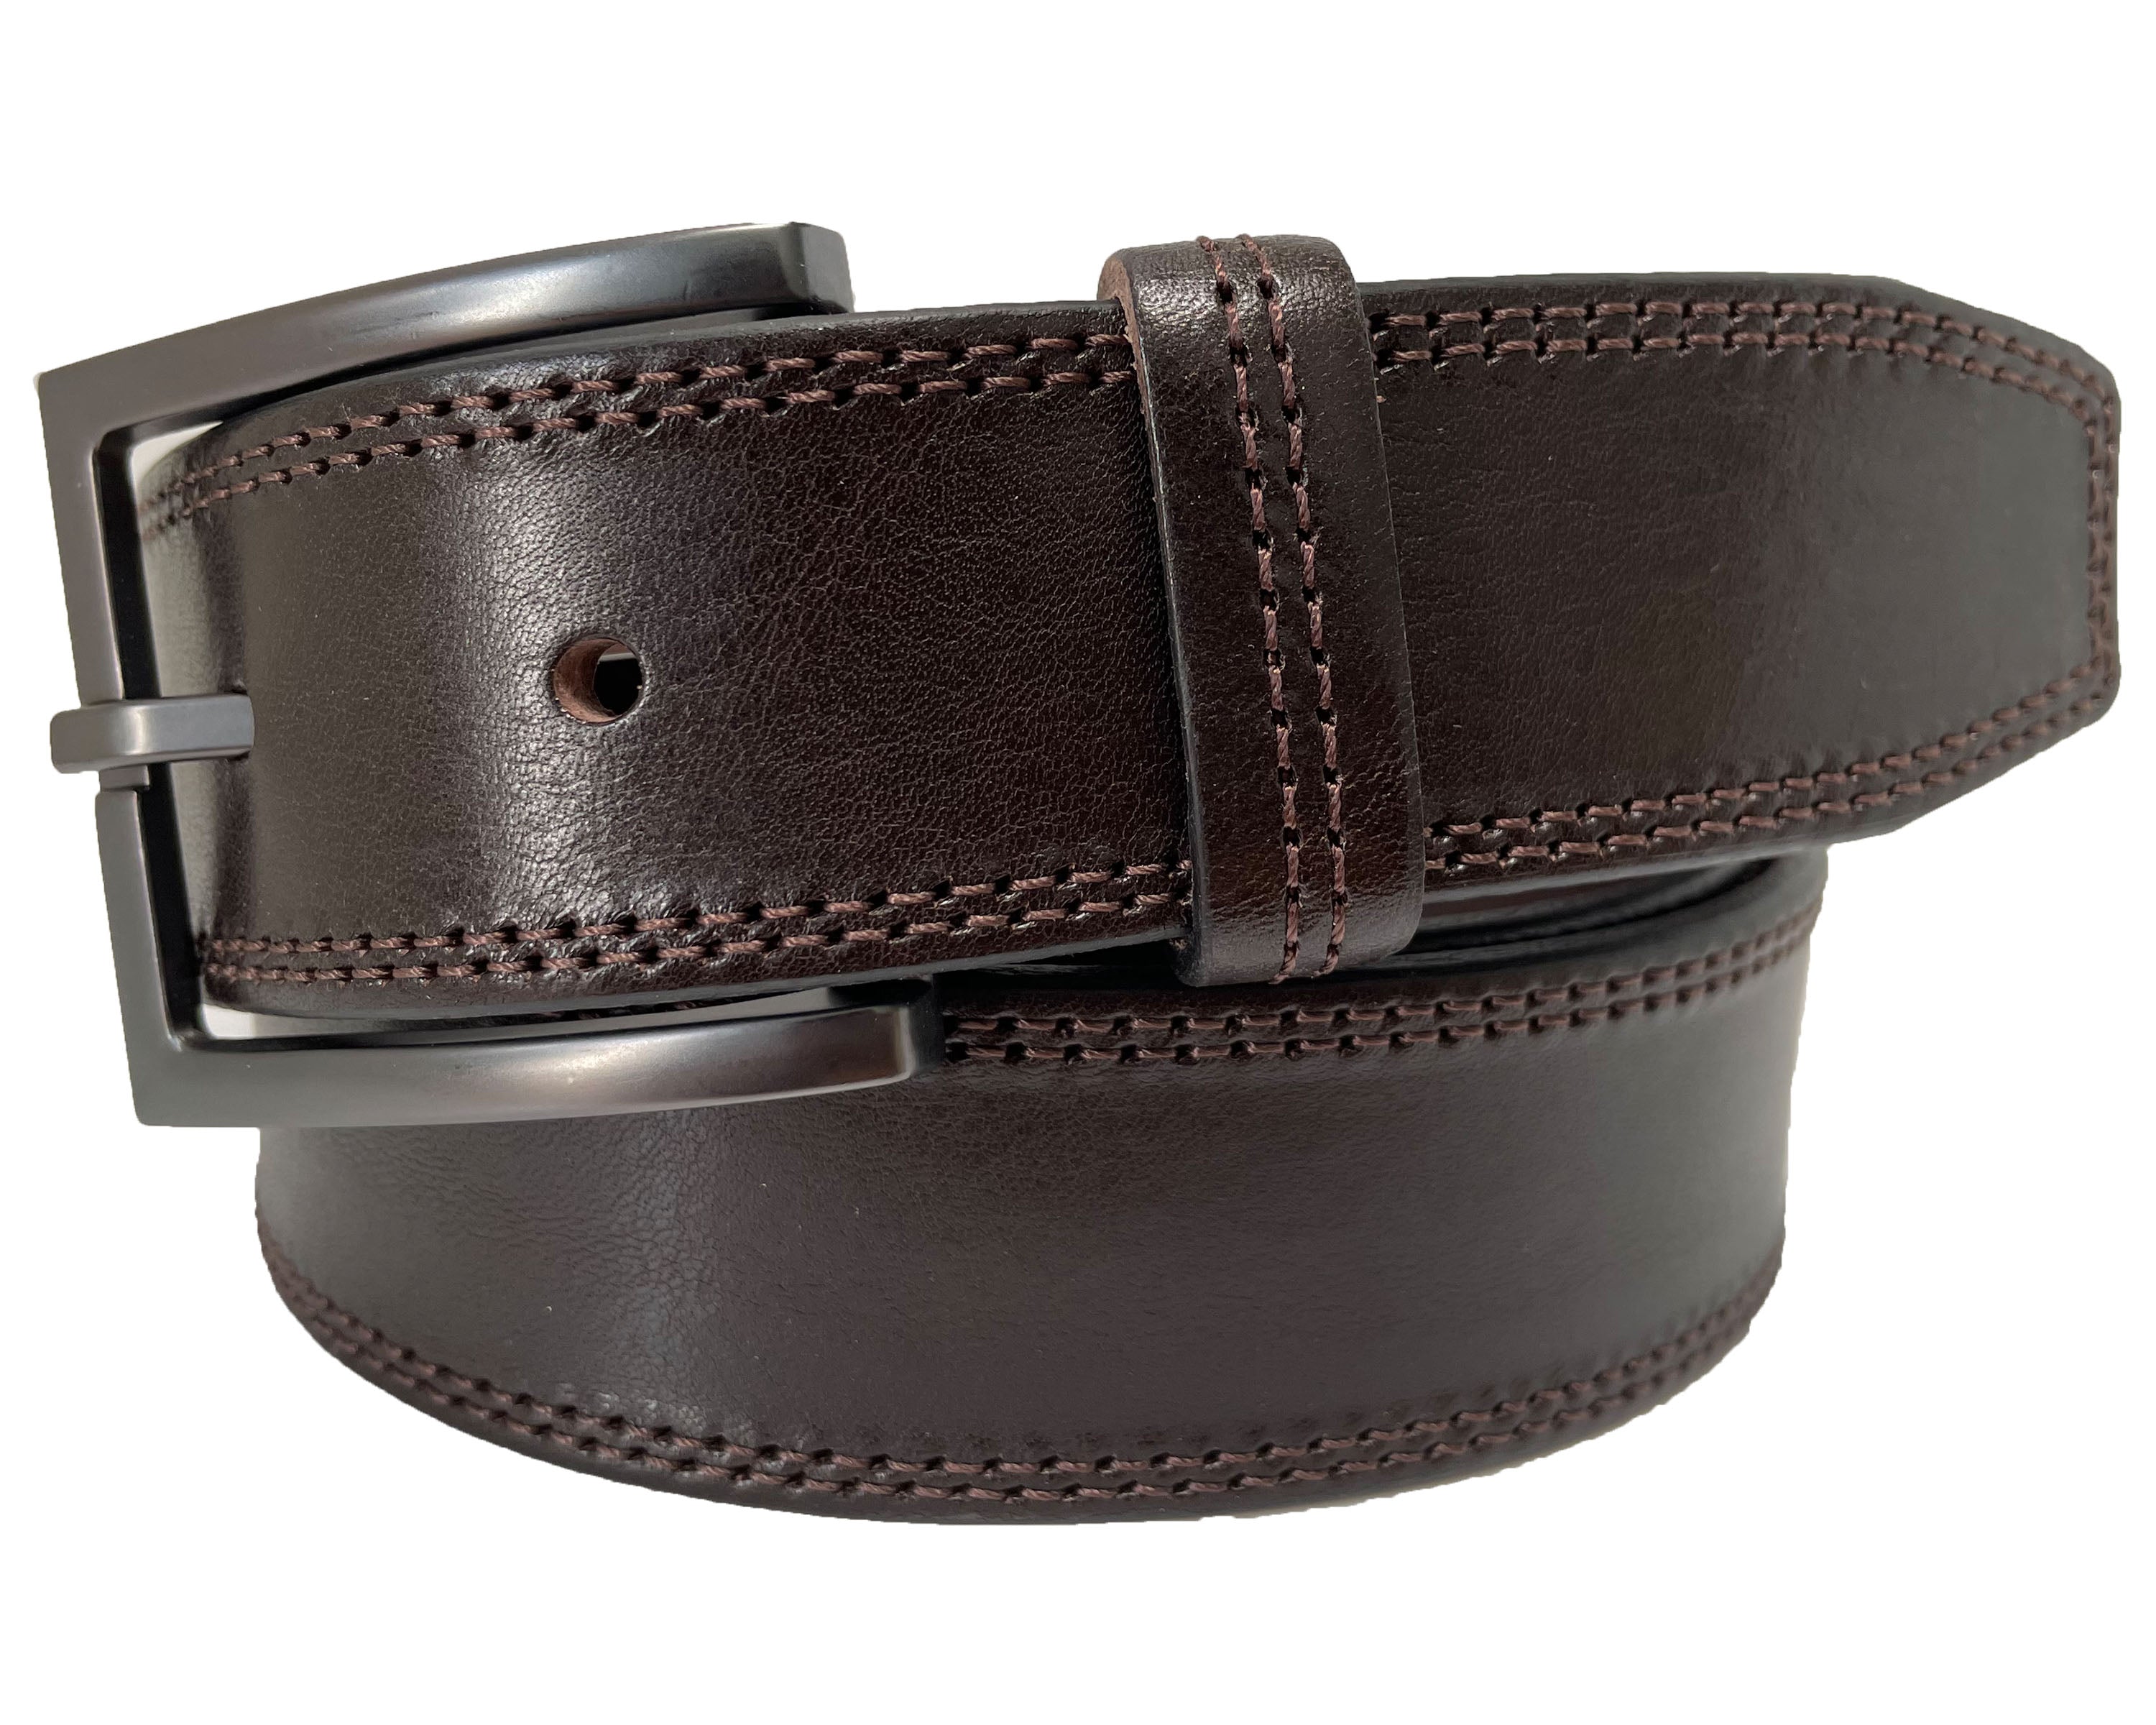 DARK BROWN DOUBLE STITCHED HIDE LEATHER BELT 35MM